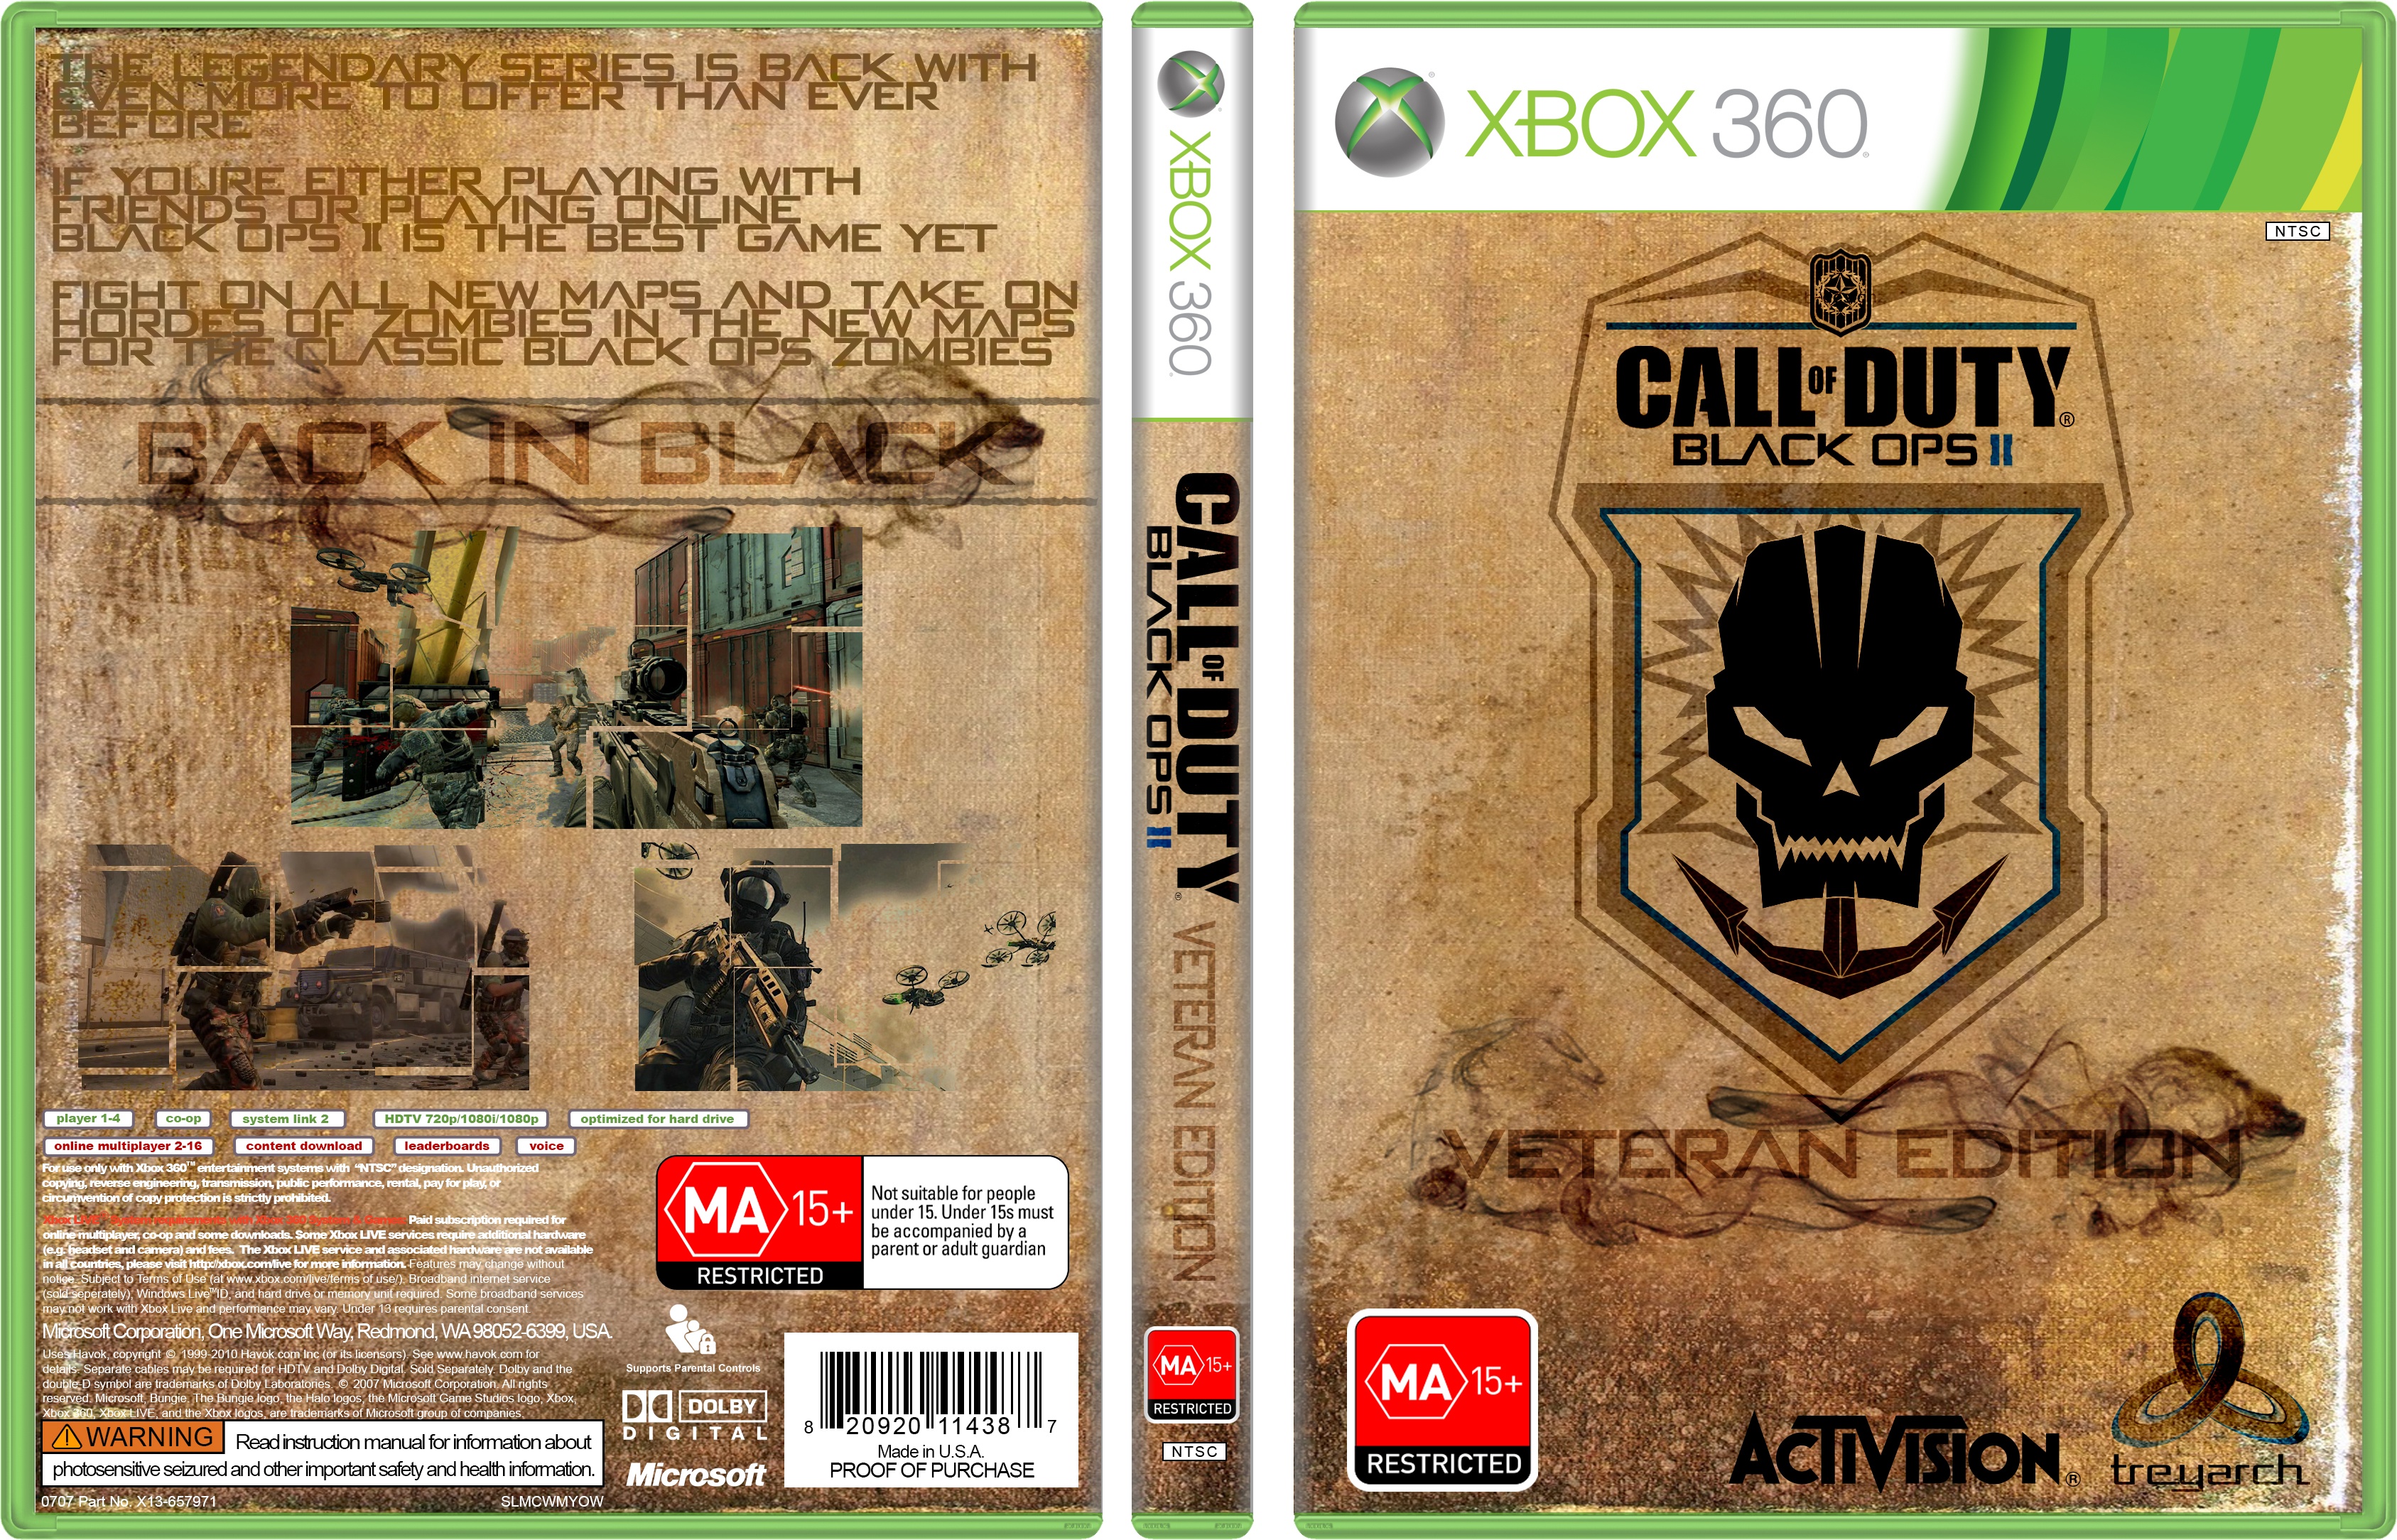 Call of Duty: Black Ops II Veteran Edition box cover